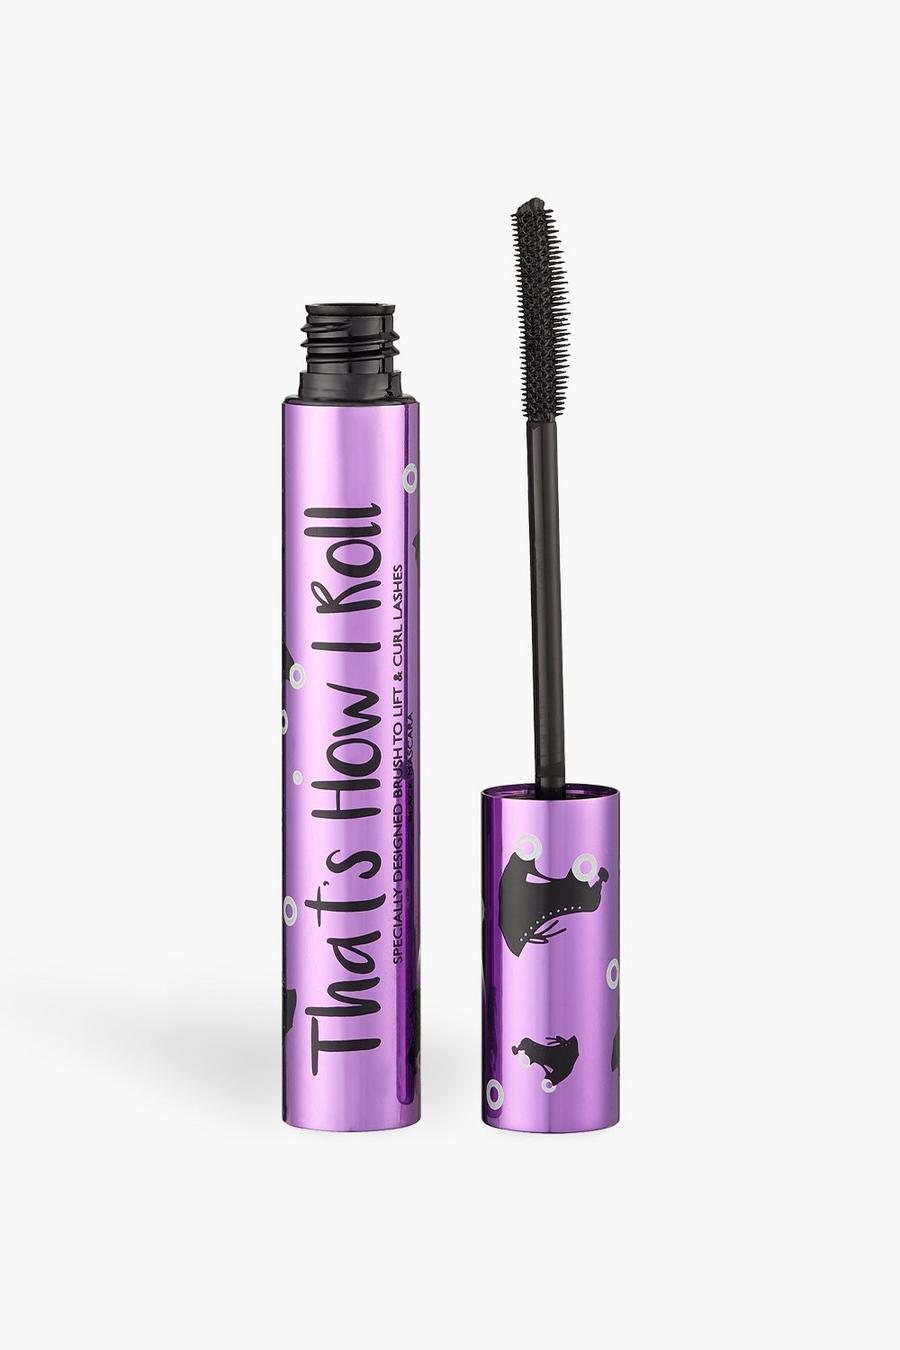 Black Barry M That's How I Roll Mascara